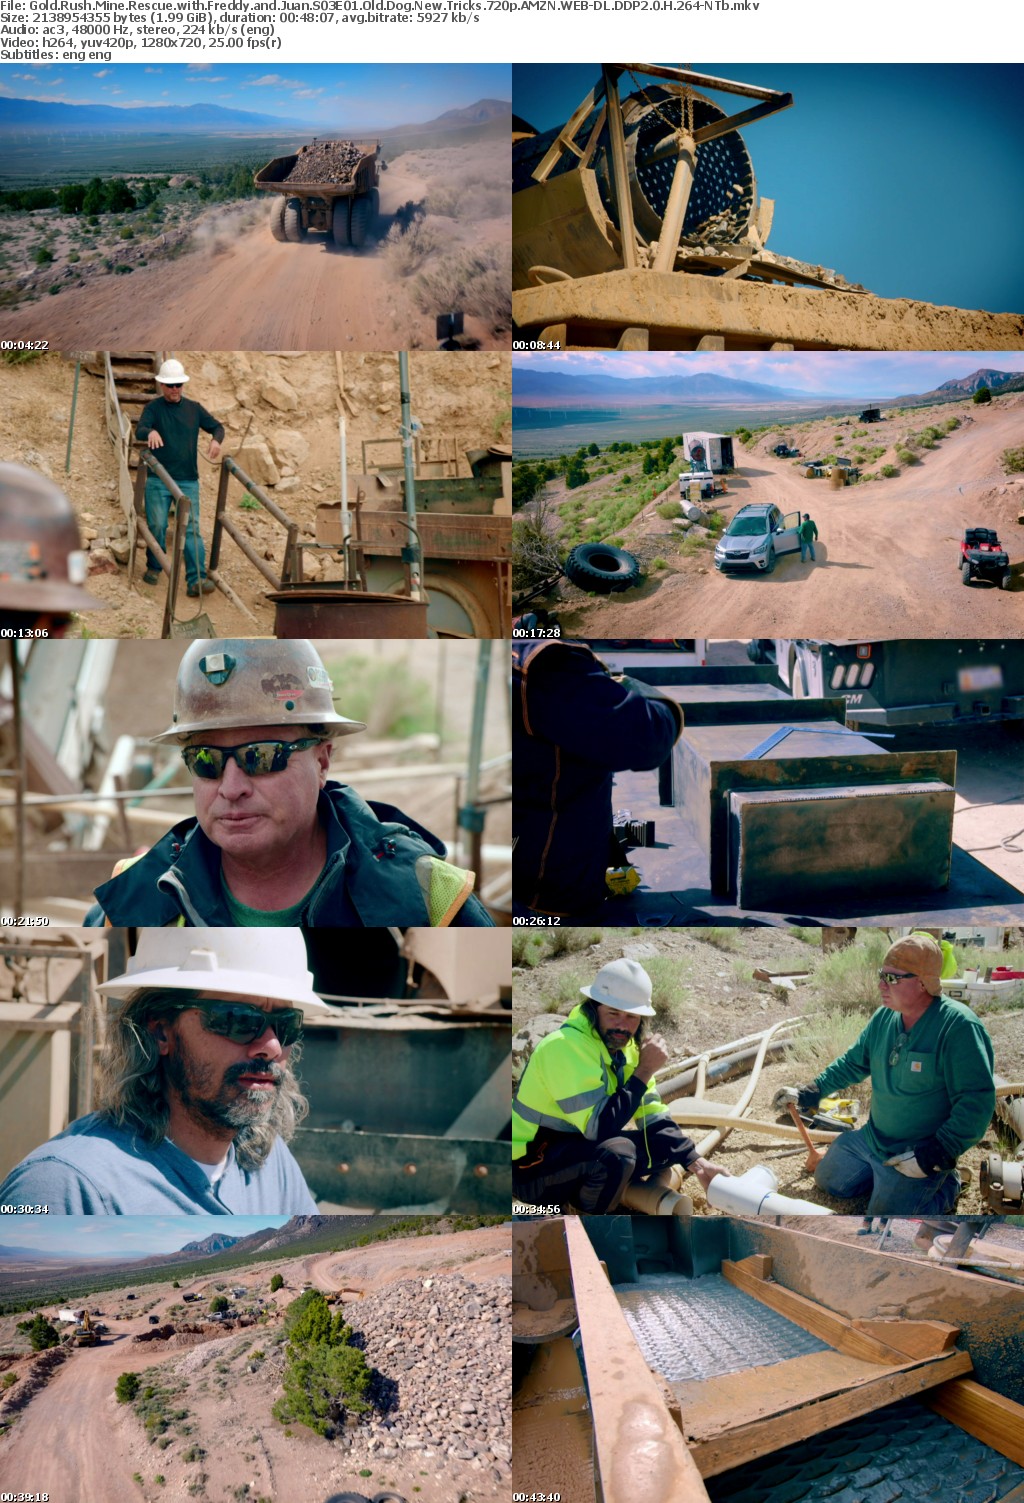 Gold Rush Mine Rescue with Freddy and Juan S03E01 Old Dog New Tricks 720p AMZN WEB-DL DDP2 0 H 264-NTb